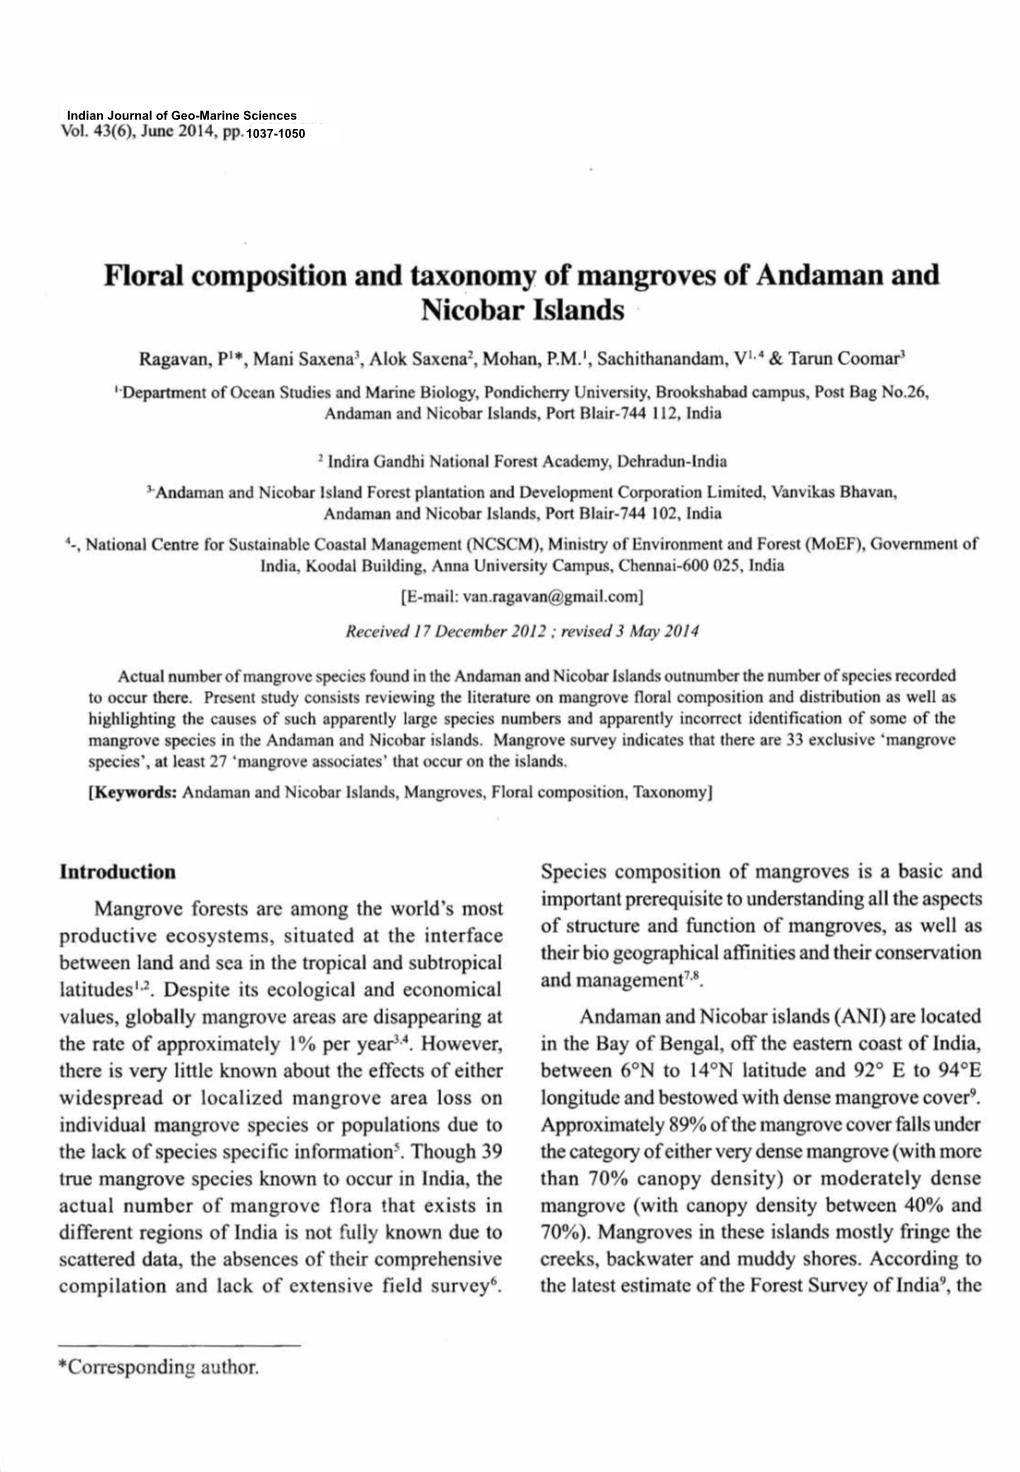 Floral Composition and Taxonomy of Mangroves of Andaman and Nicobar Islands